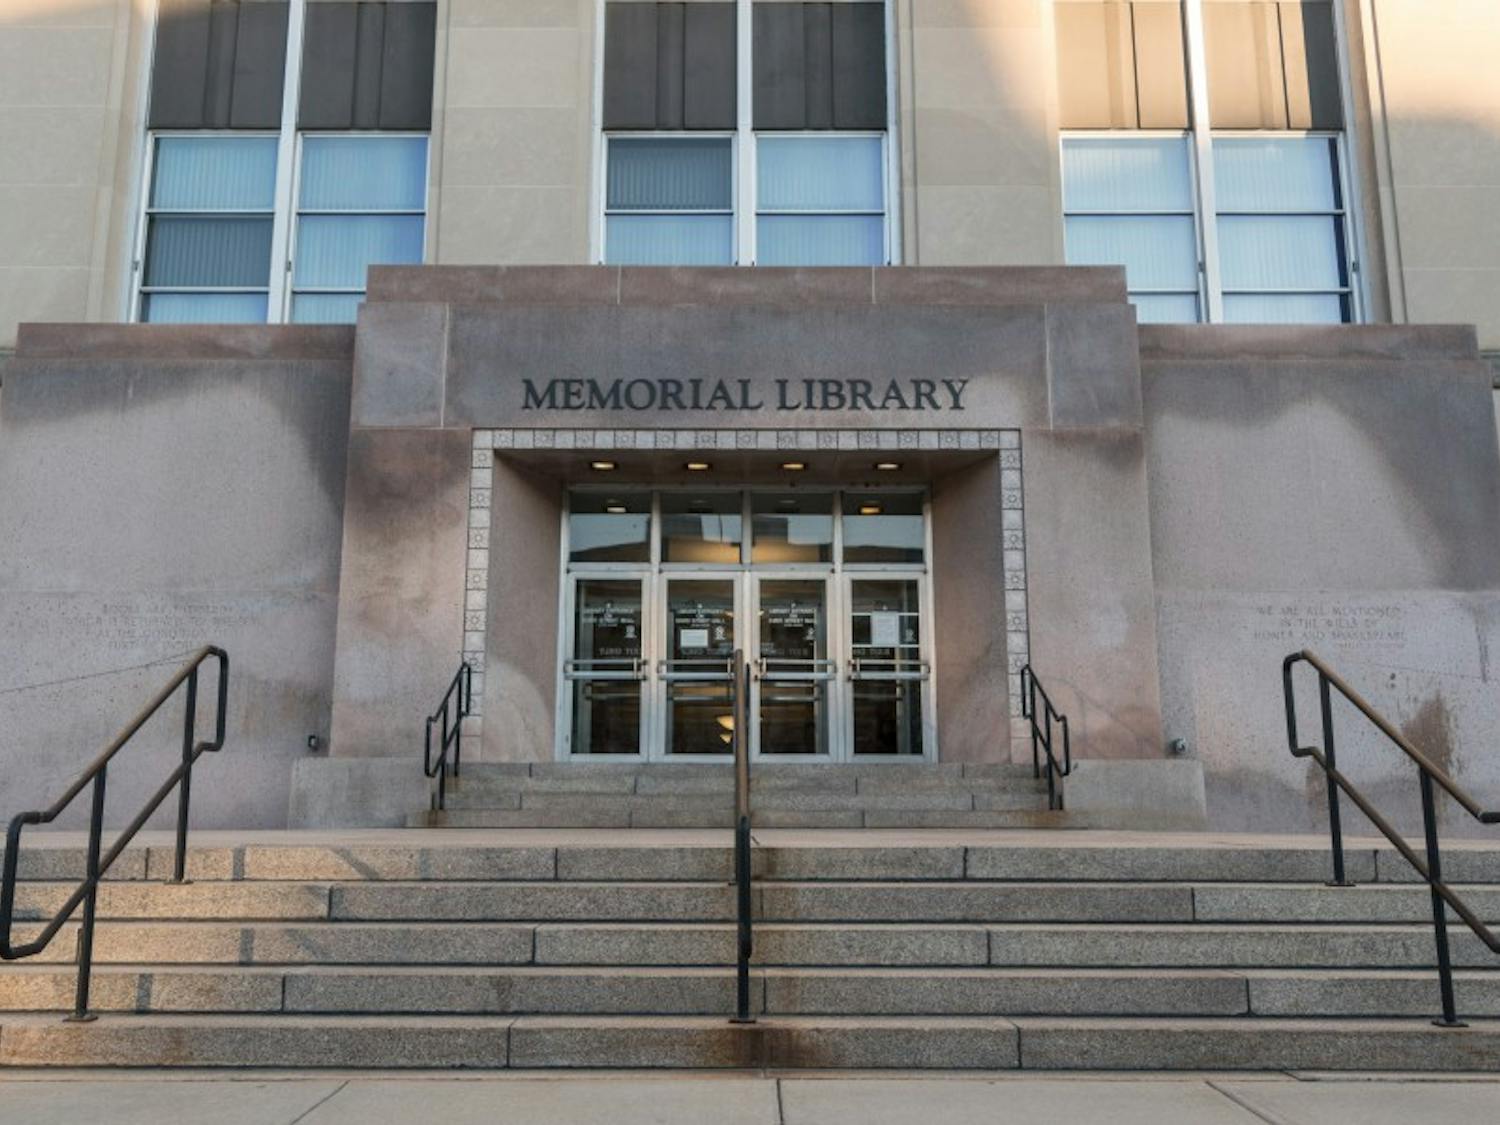 UW-Madison Libraries' "master plan" calls for a significant restructuring of Memorial Library.